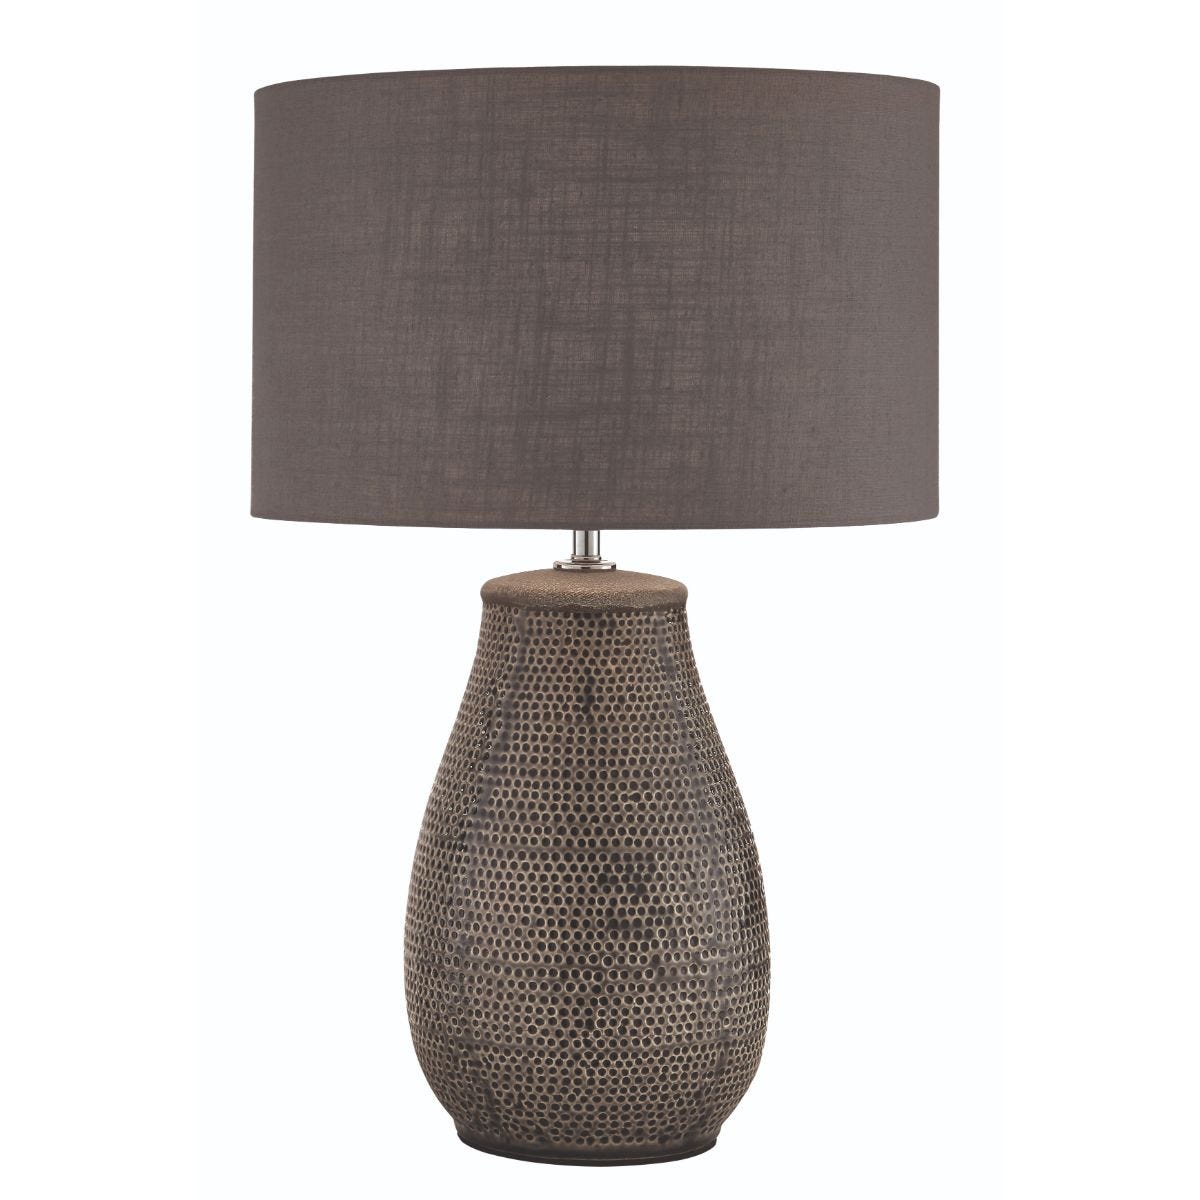 Village At Home Maxwell Table Lamp